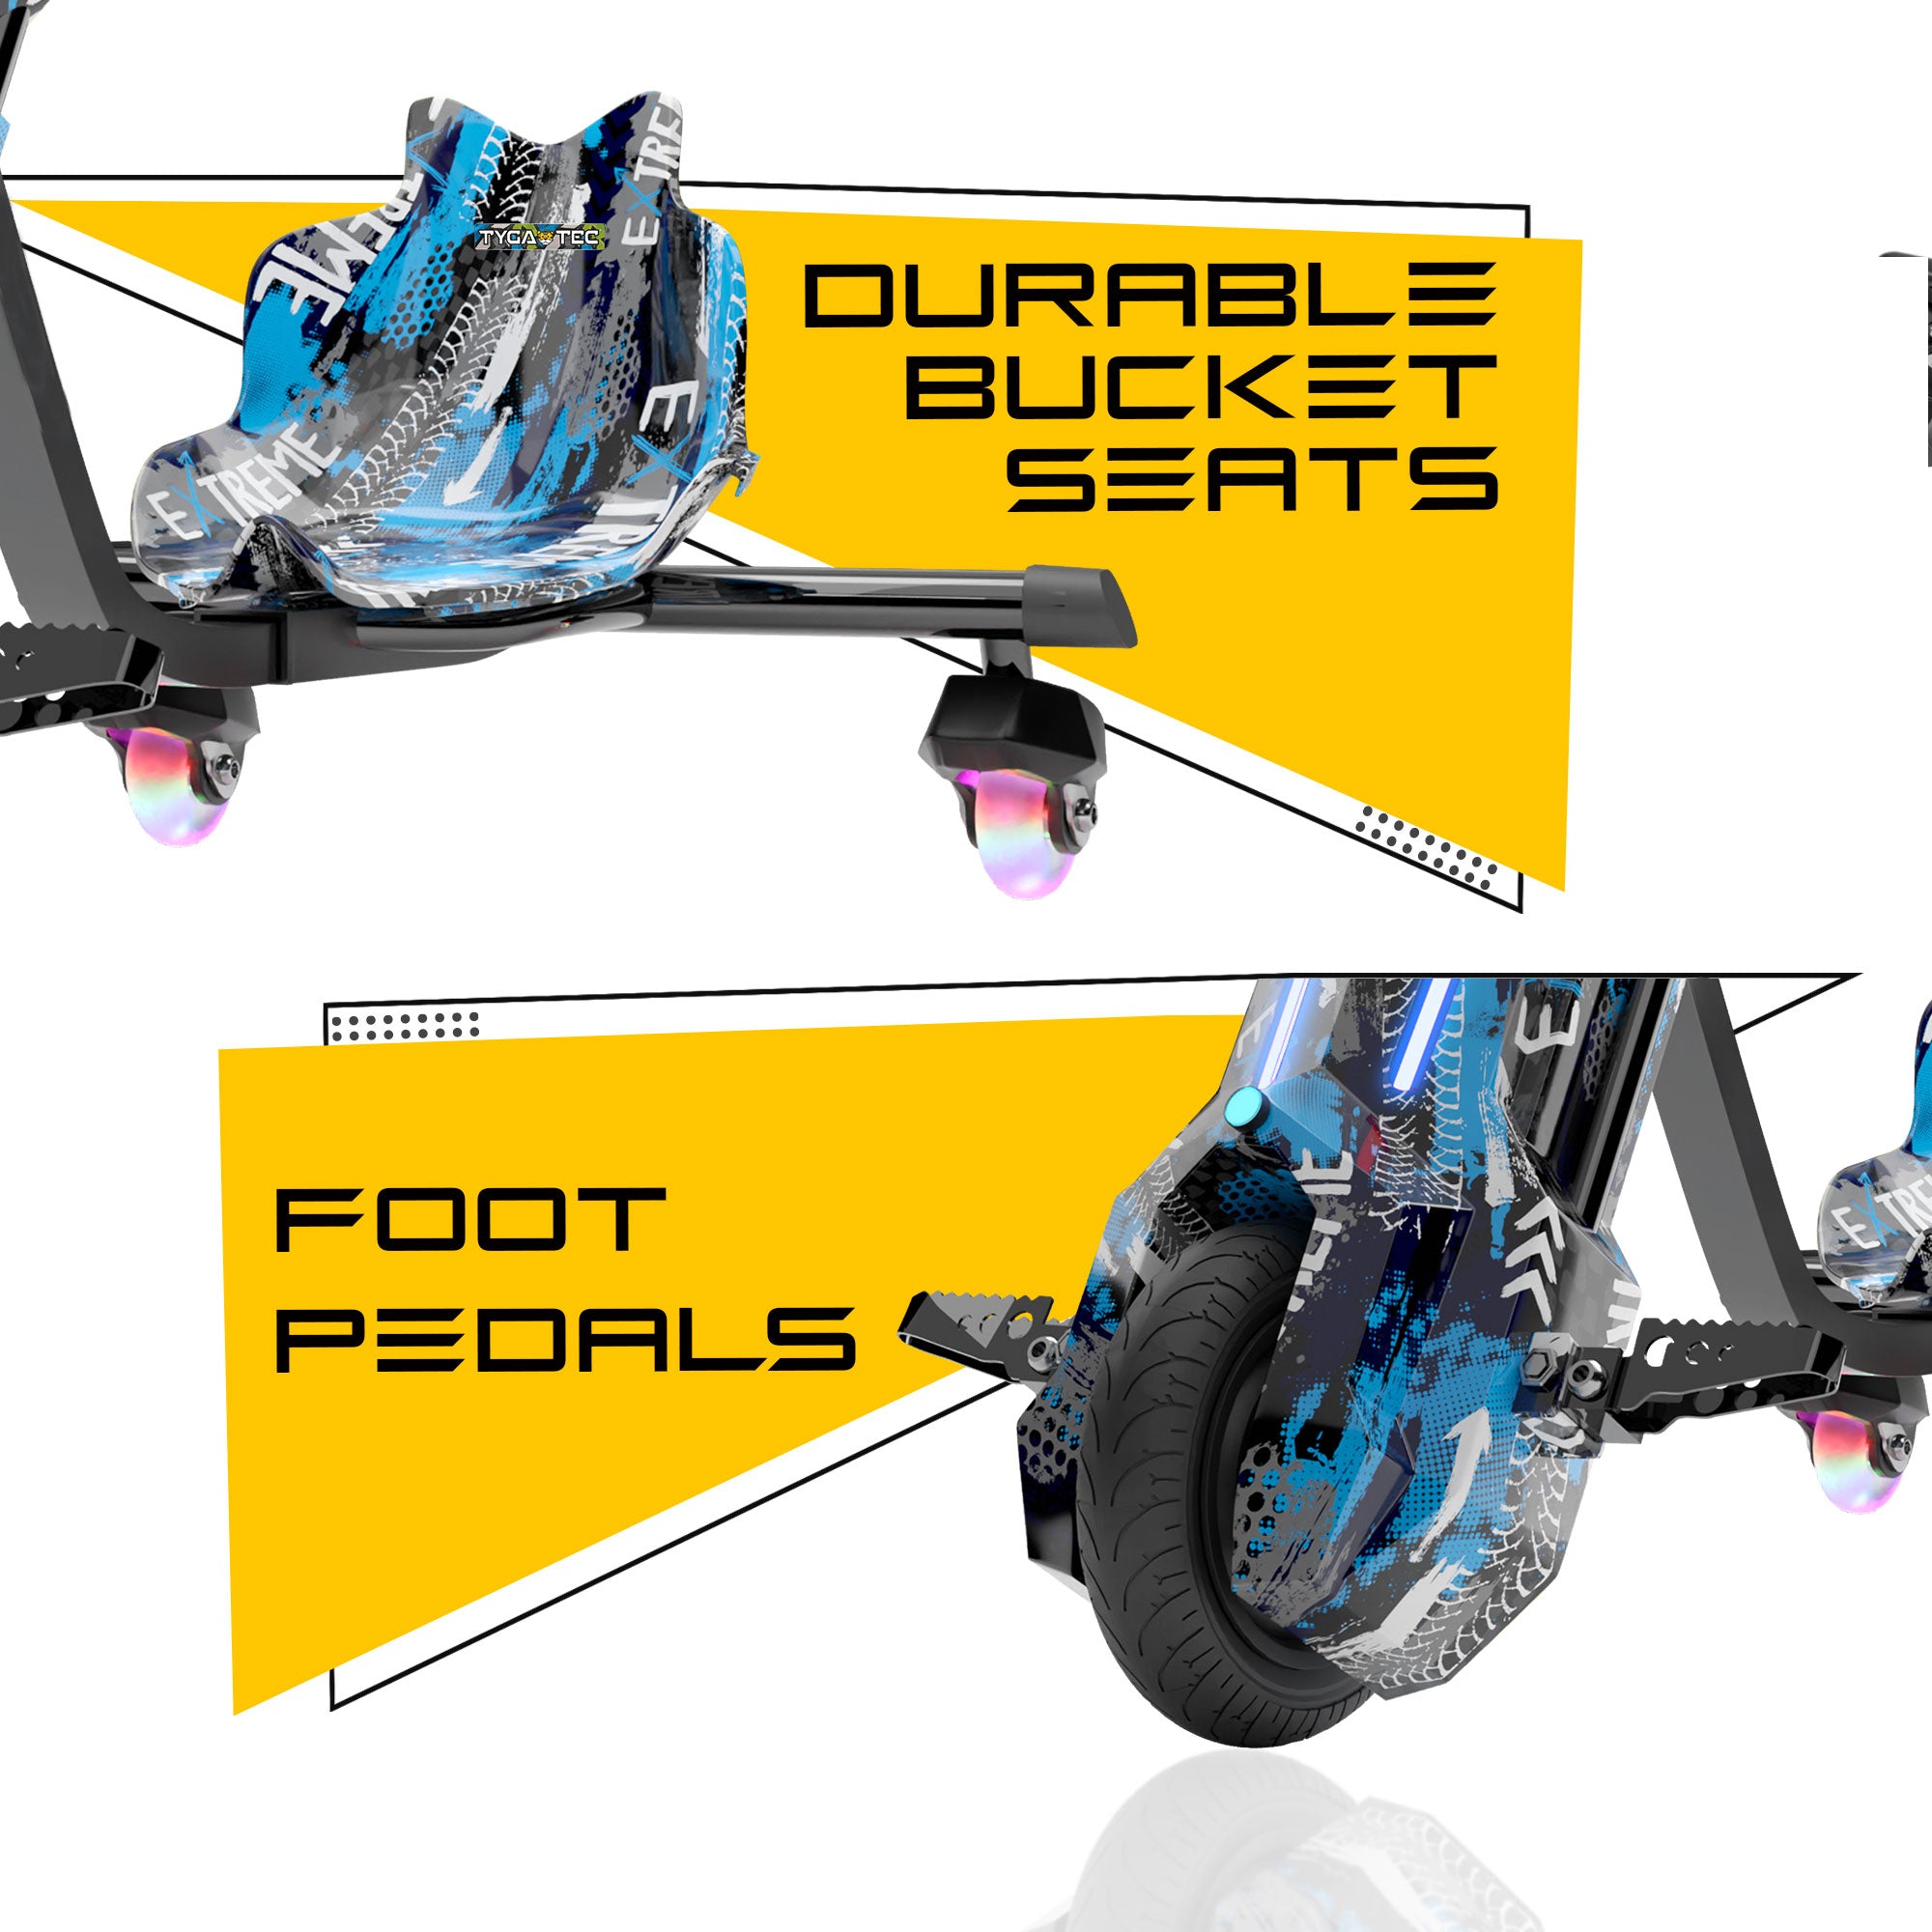 TYGATEC T9 3 WHEEL ELECTRIC 360 DRIFT SCOOTER FOR KIDS AND ADULTS WITH LED LIGHT AND BLUETOOTH (Extreme Blue color)